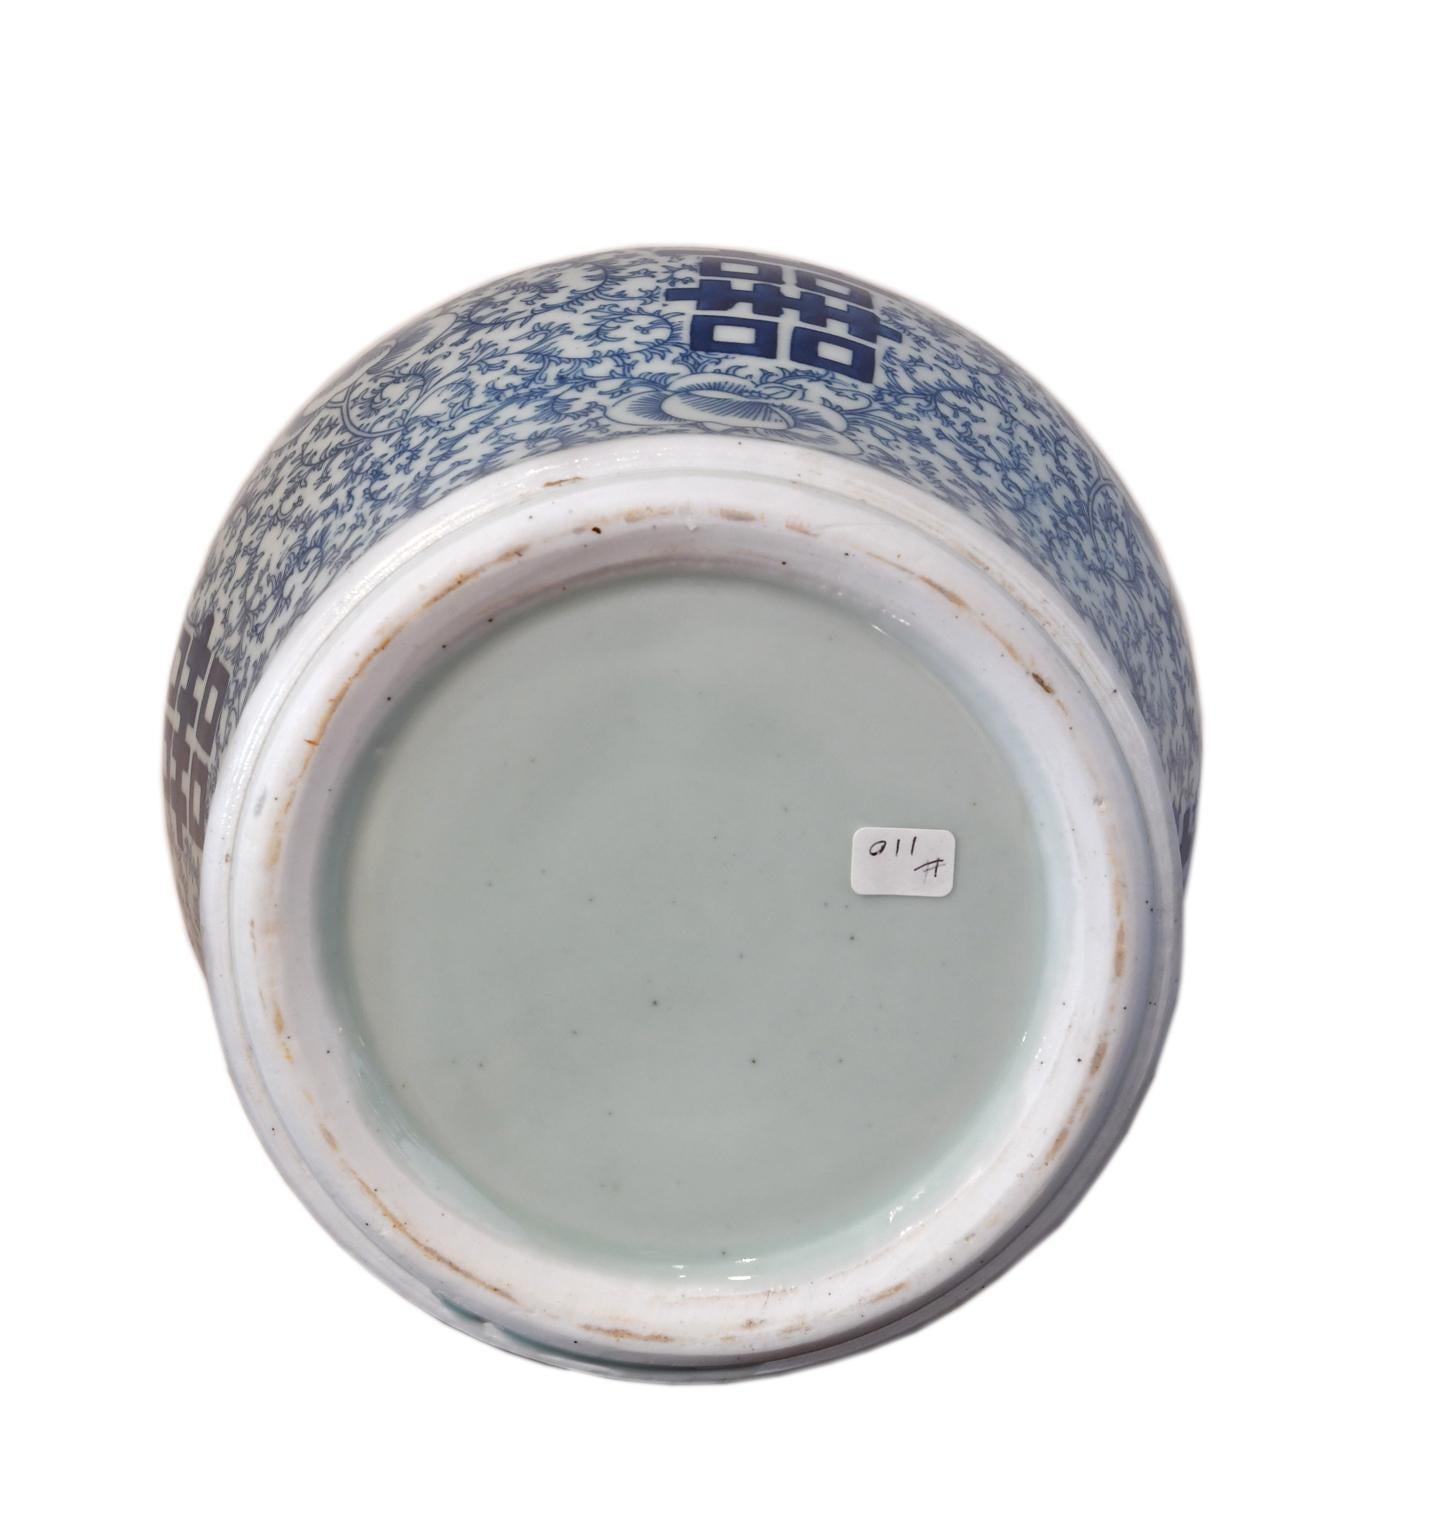 Qing Chinese Porcelain Blue & White Lidded Jar w/ Shuang-xi or Double Happiness In Good Condition For Sale In Miami, FL